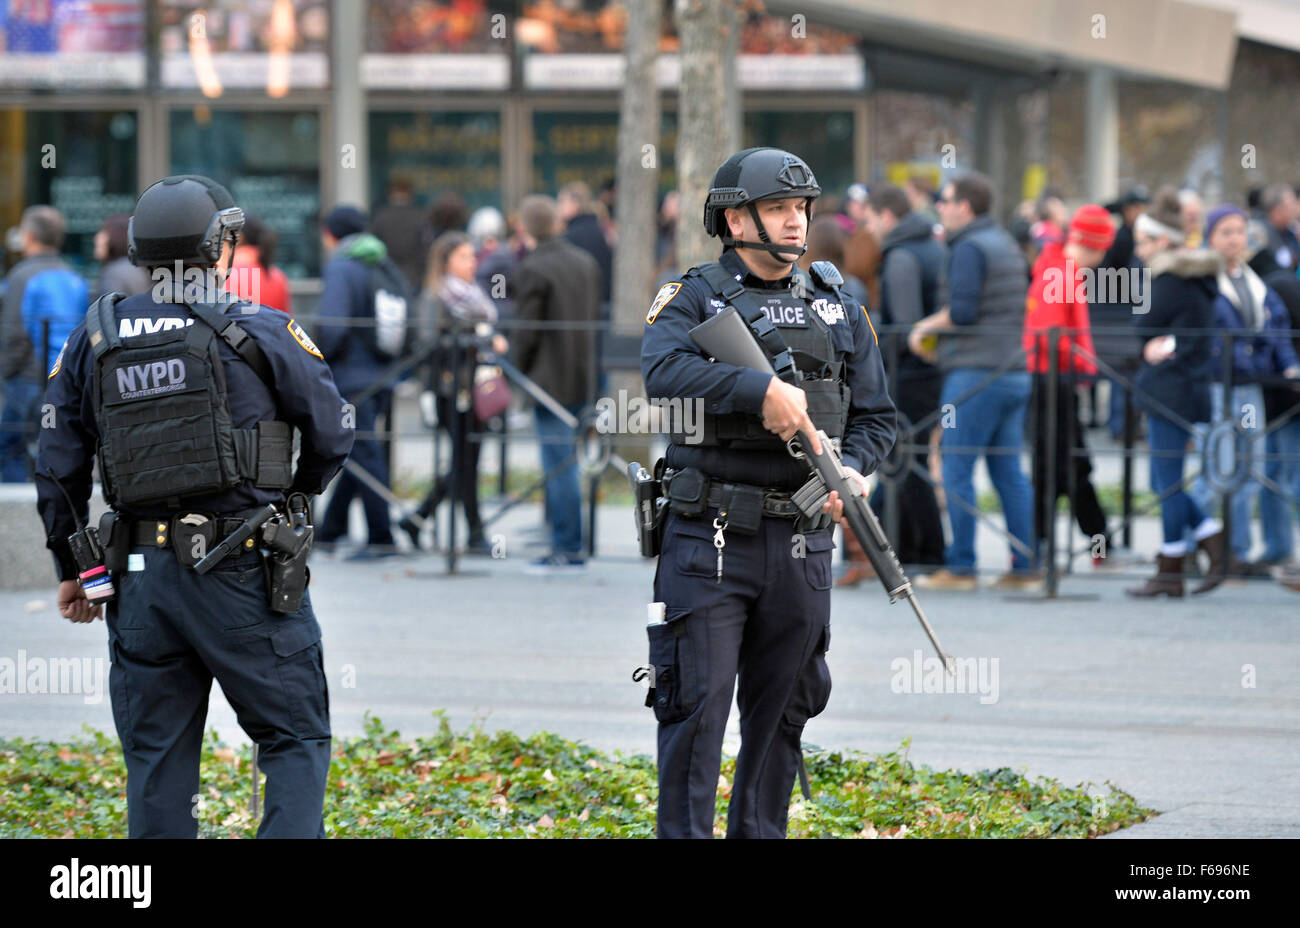 New York, USA. 14th Nov, 2015. Two NYPD armed police officers stand guard near the 9/11 Memorial Museum in Manhattan, New York City, the United States, Nov. 14, 2015. The NYPD Counterterrorism Response Command (CRC), the Critical Response Group (SRG), and Operation Hercules Teams have been dispatched to crowded areas around the city as a precaution after the deadly series of attacks hit Paris on Friday night. © Wang Lei/Xinhua/Alamy Live News Stock Photo